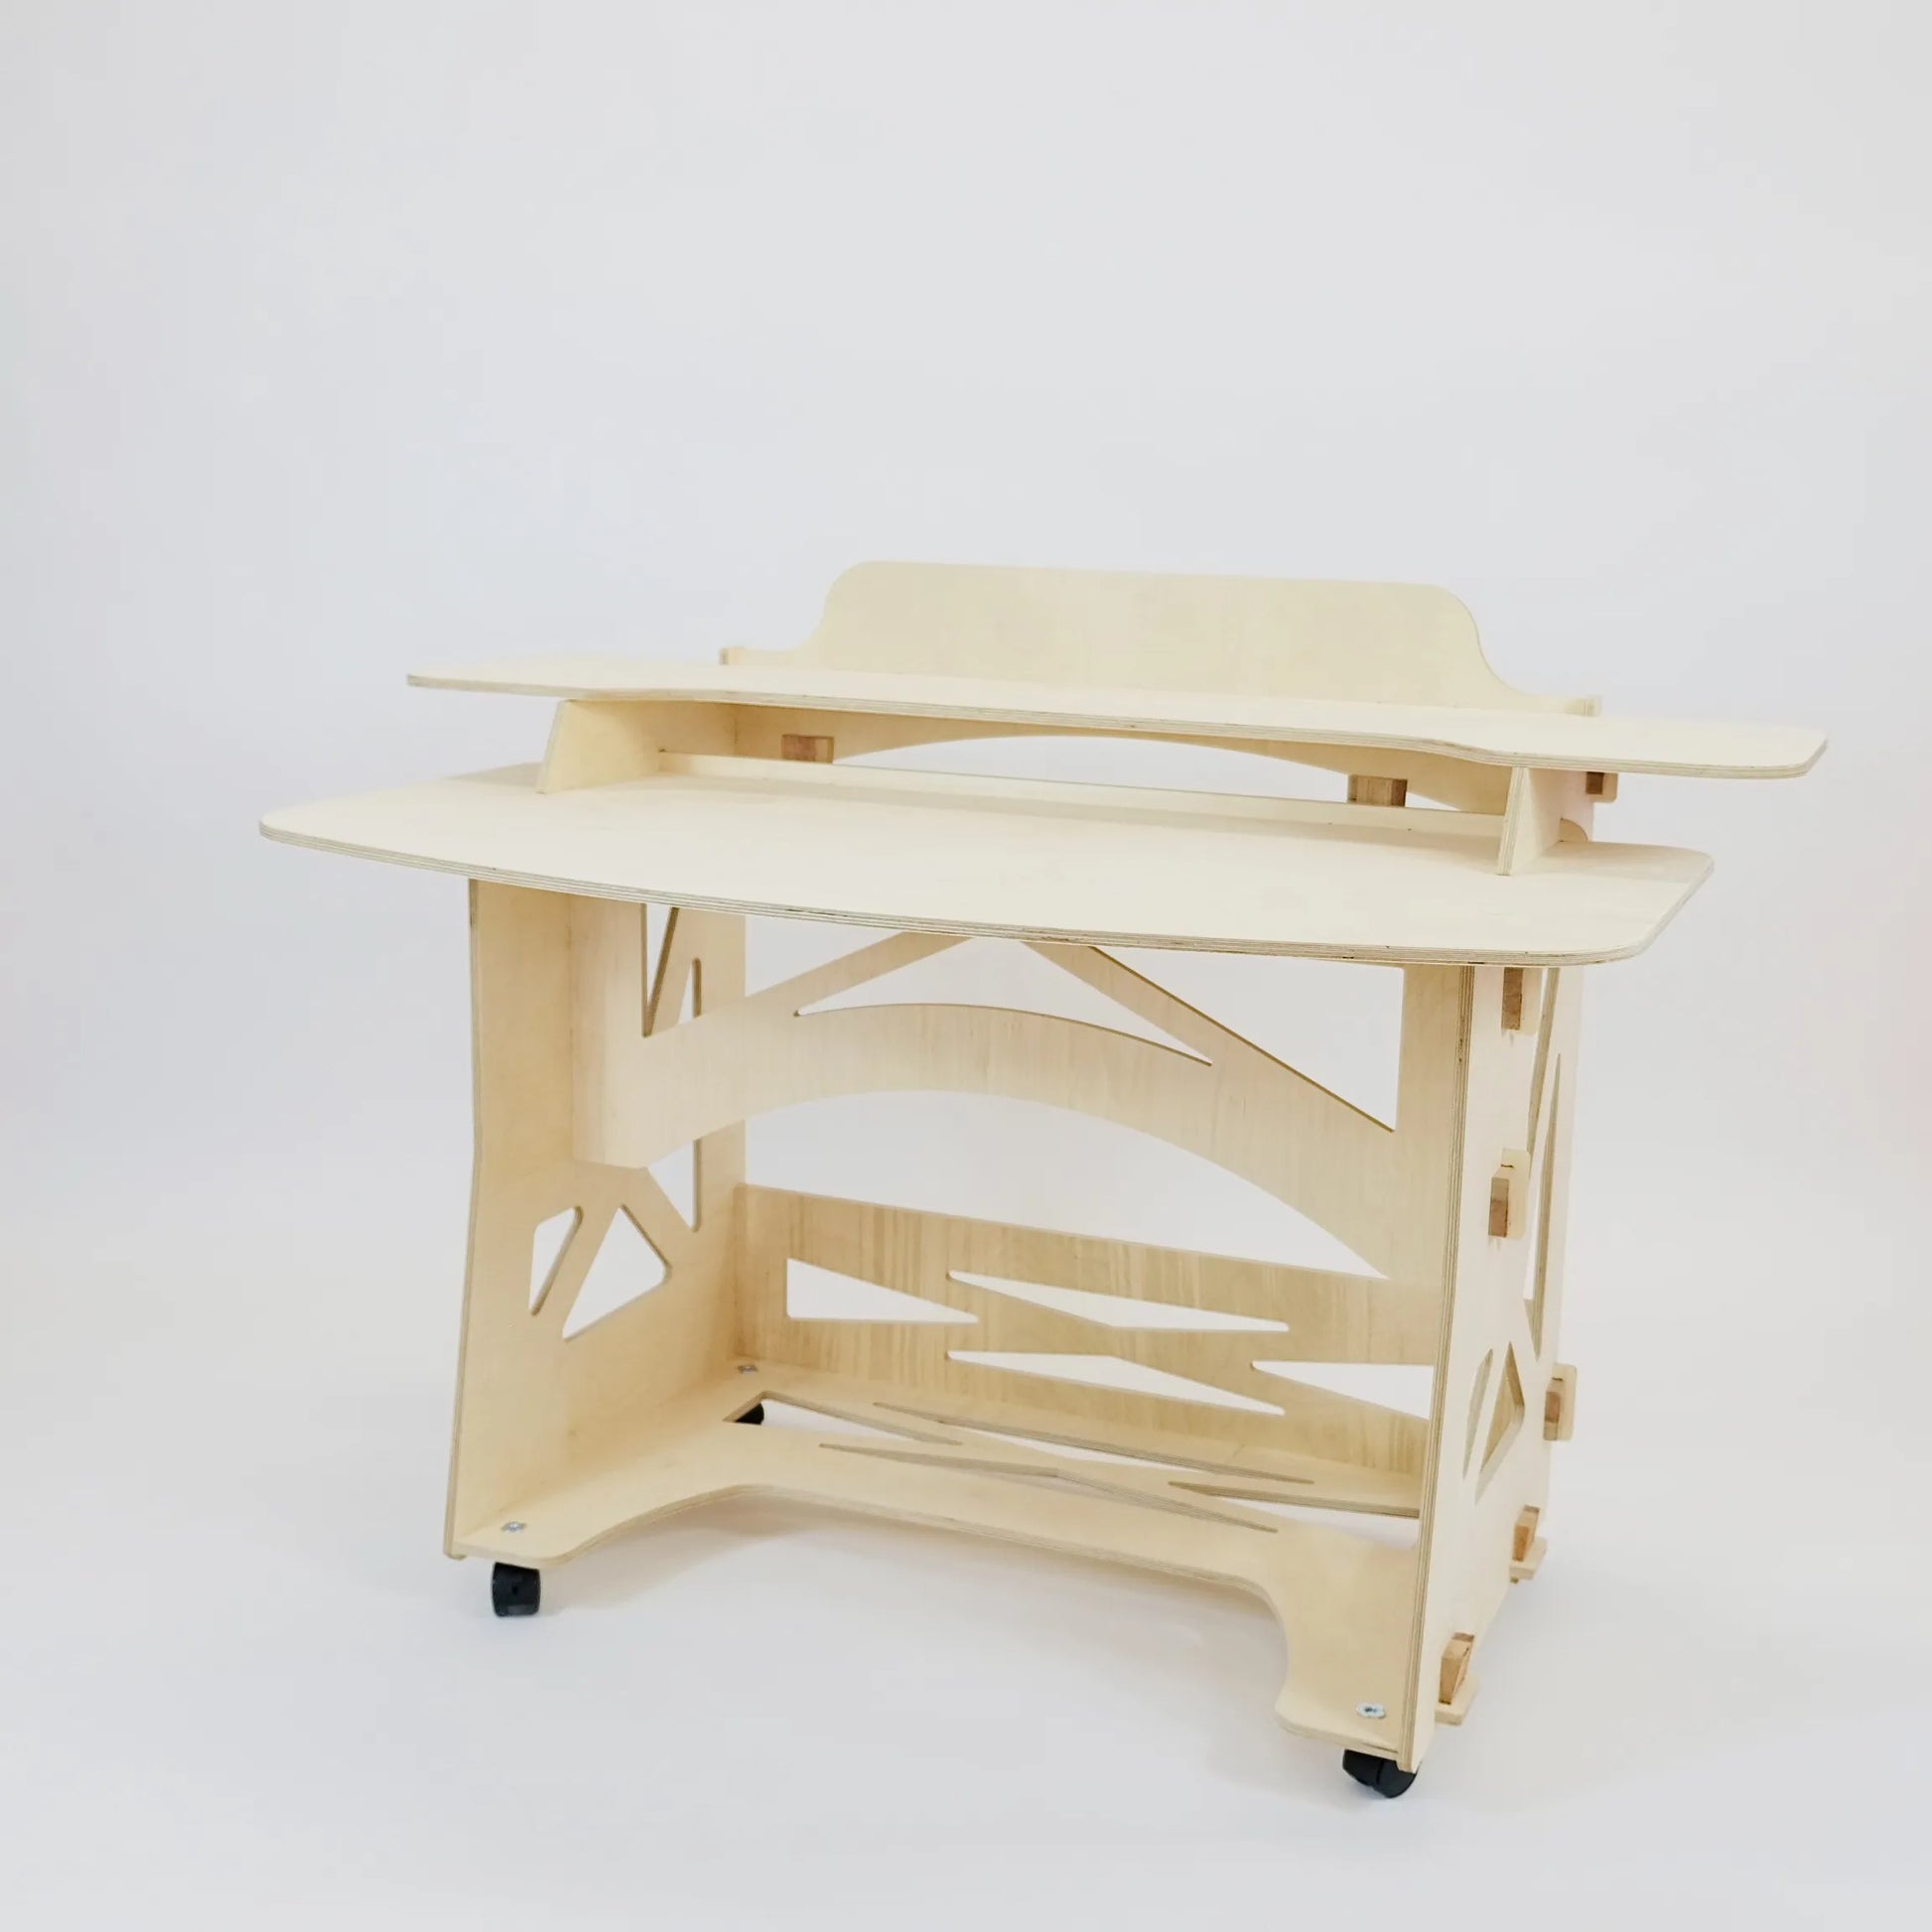 A pale wooden desk sits facing diagonally to the left. There are castors and two desk top levels. 